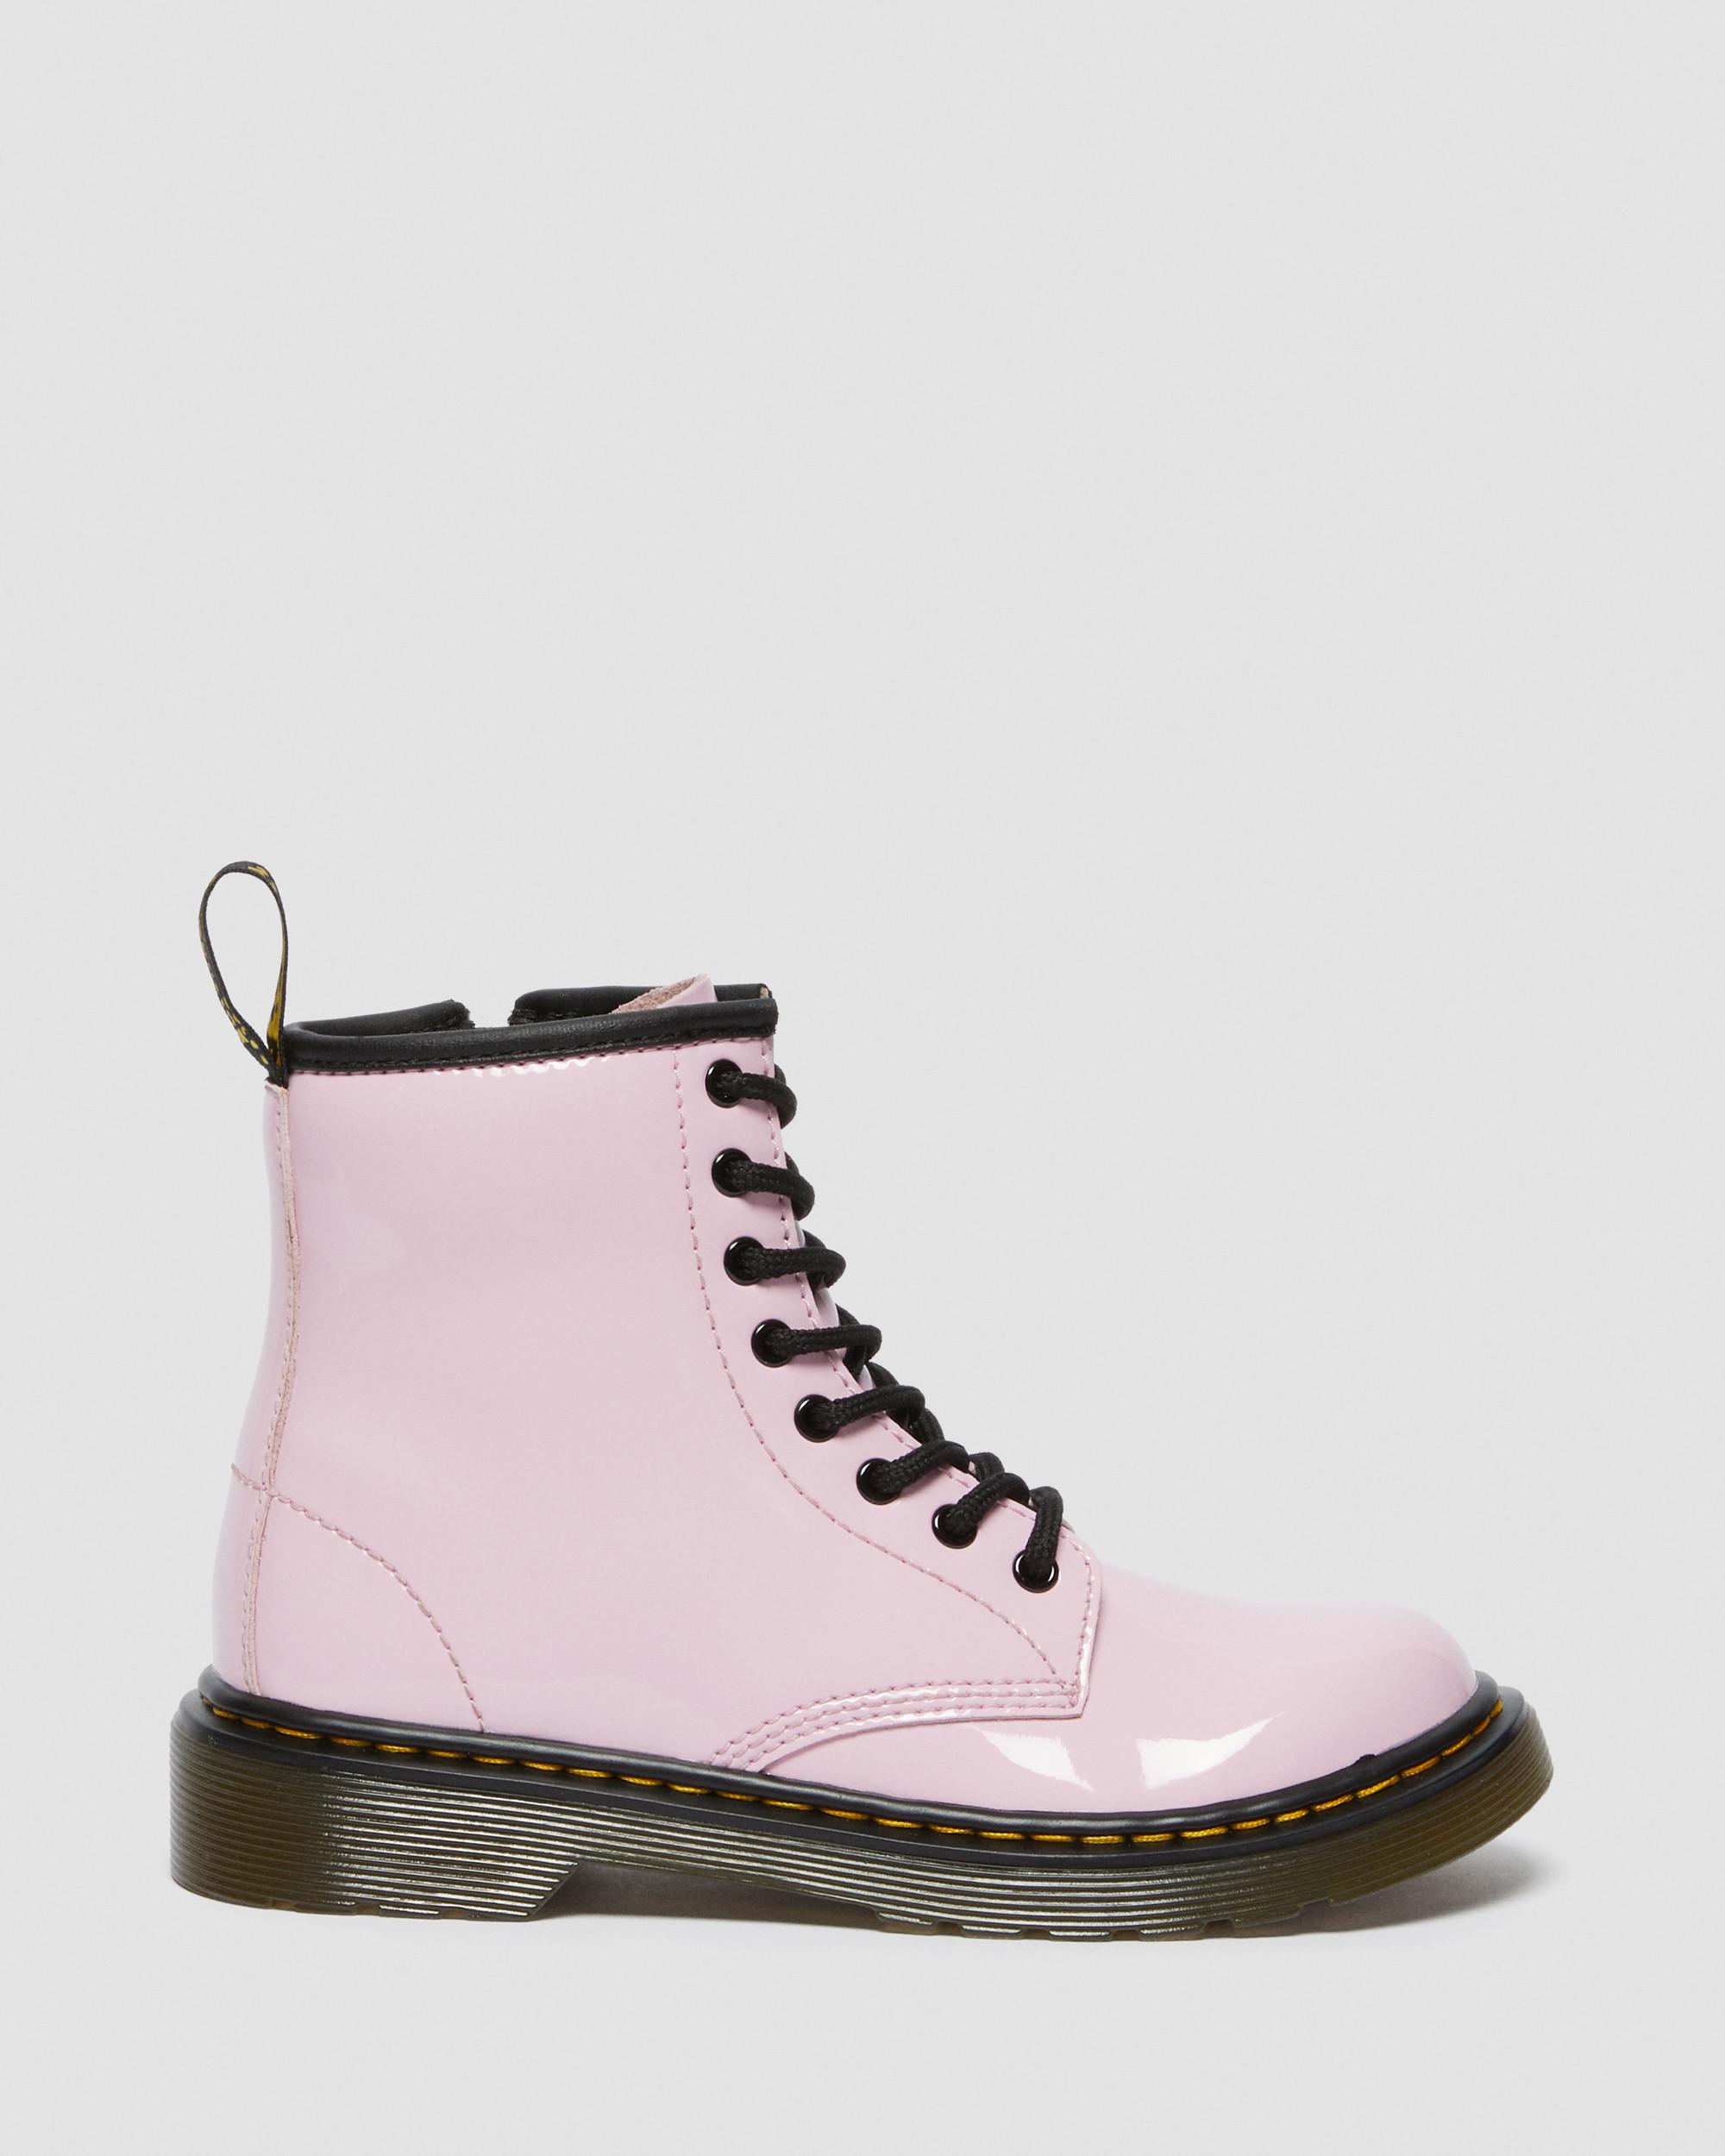 Junior 1460 Patent Leather Lace Up Boots in Pale Pink